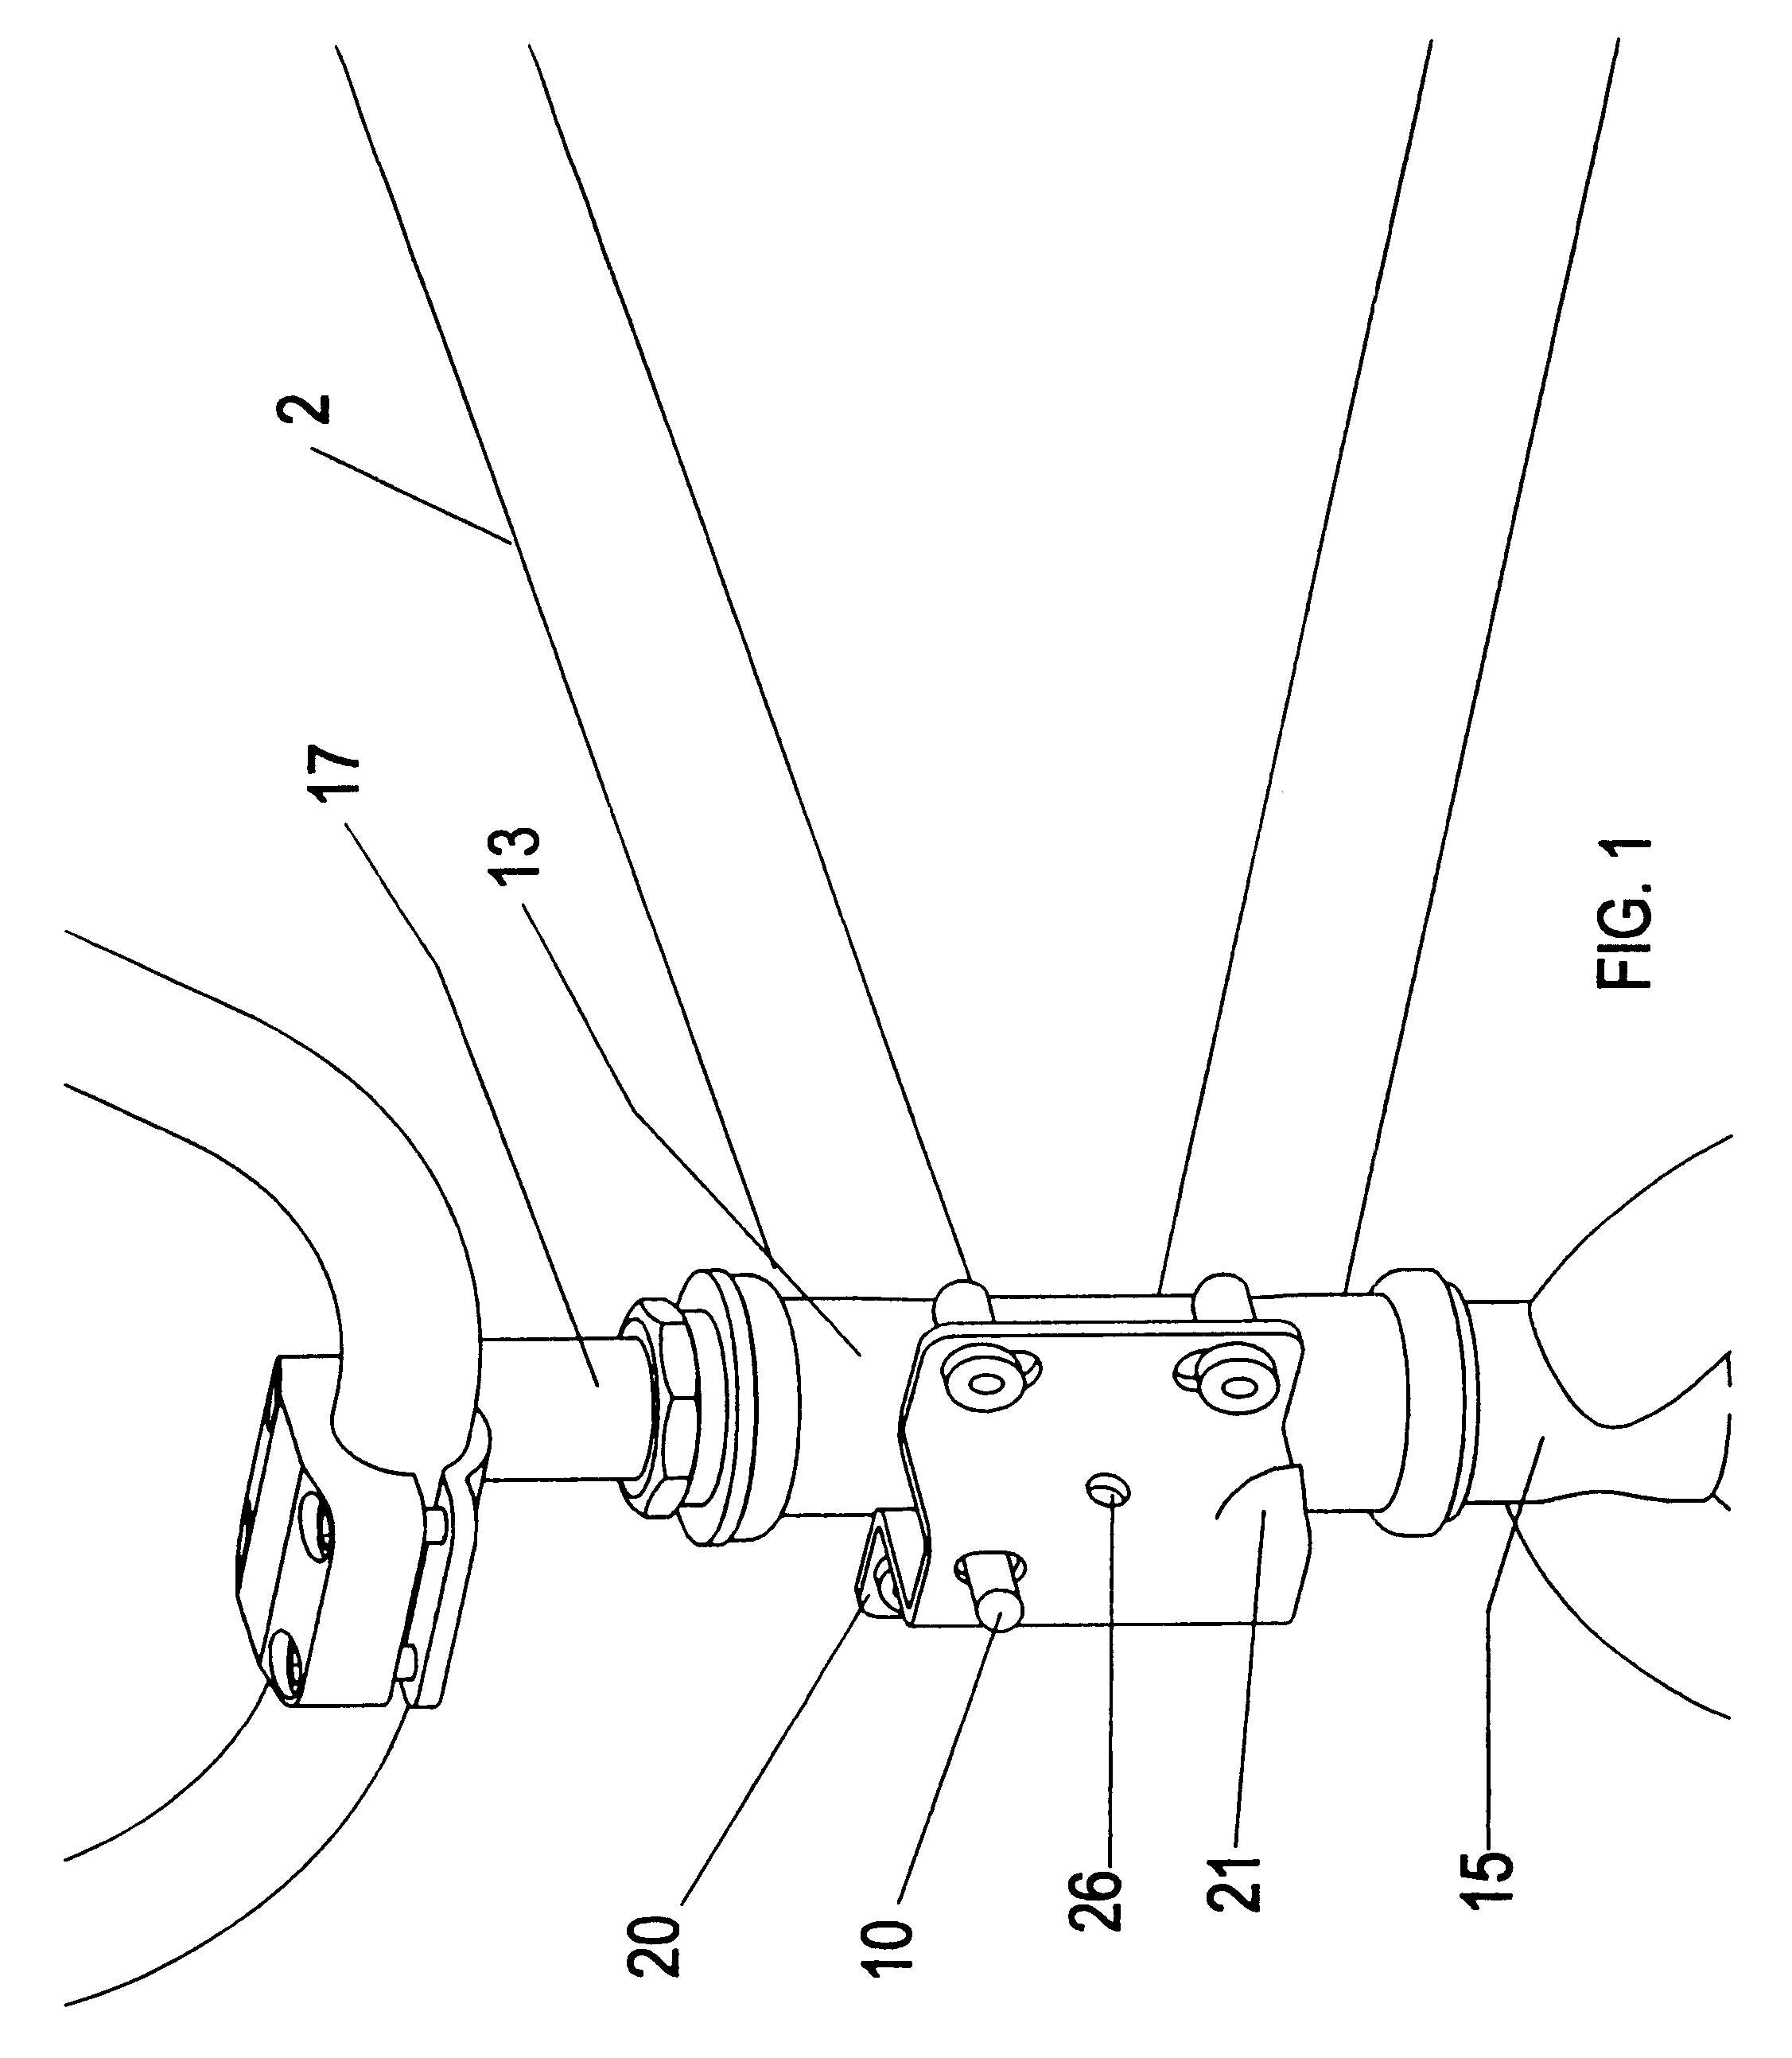 Automated bicycle steering lock